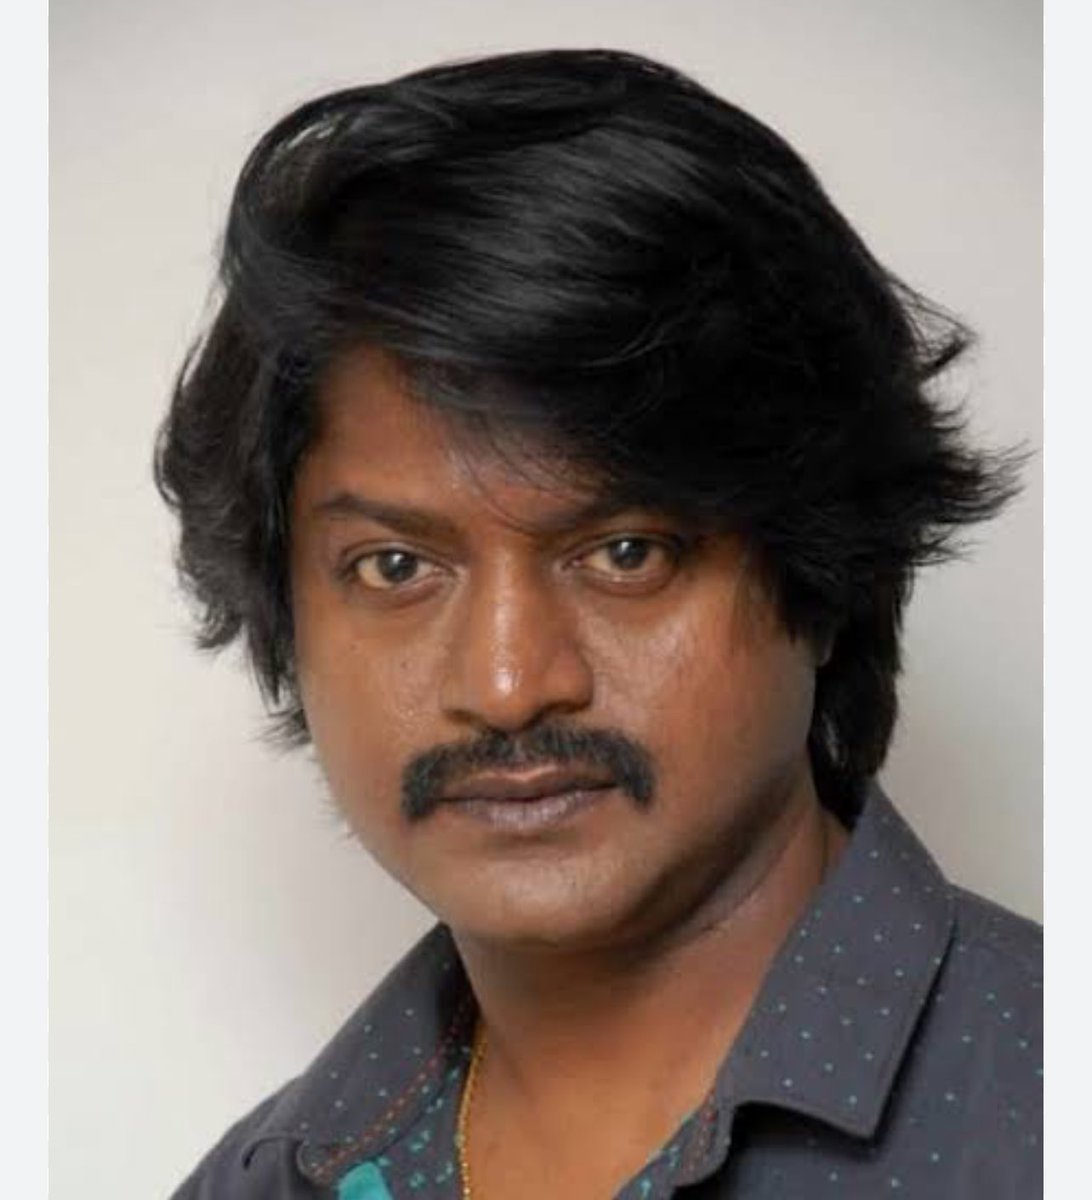 Actor #DanielBalaji has pledged his eyes for donation after his death.. The doctors have fulfilled his wish! Great Man! 🙏 #RIPDanielBalaji